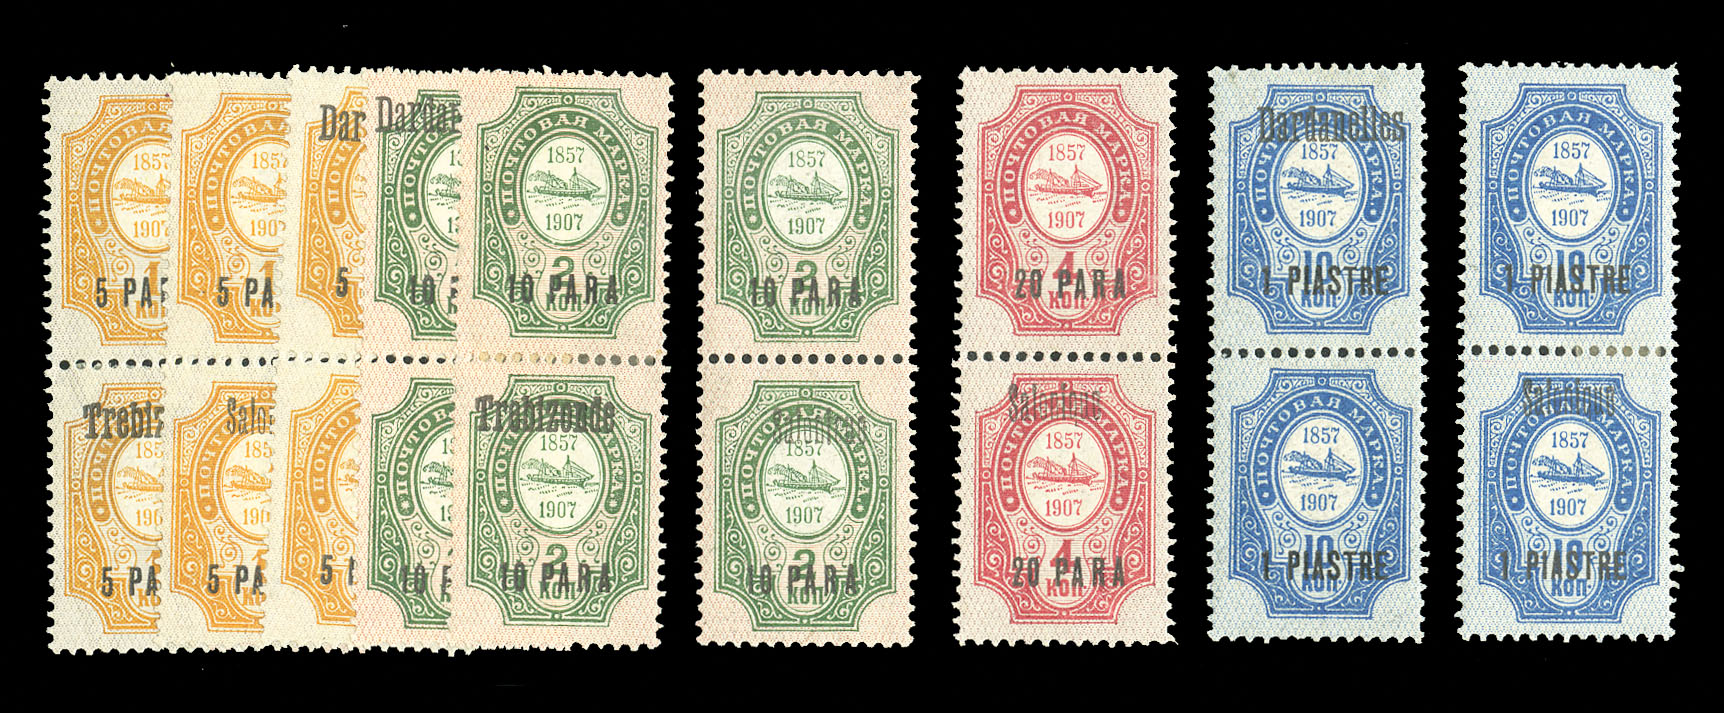 Lot 1250 - RUSSIA Russian Offices in China - Sinkiang  -  Cherrystone Auctions U.S. & Worldwide Stamps & Postal History